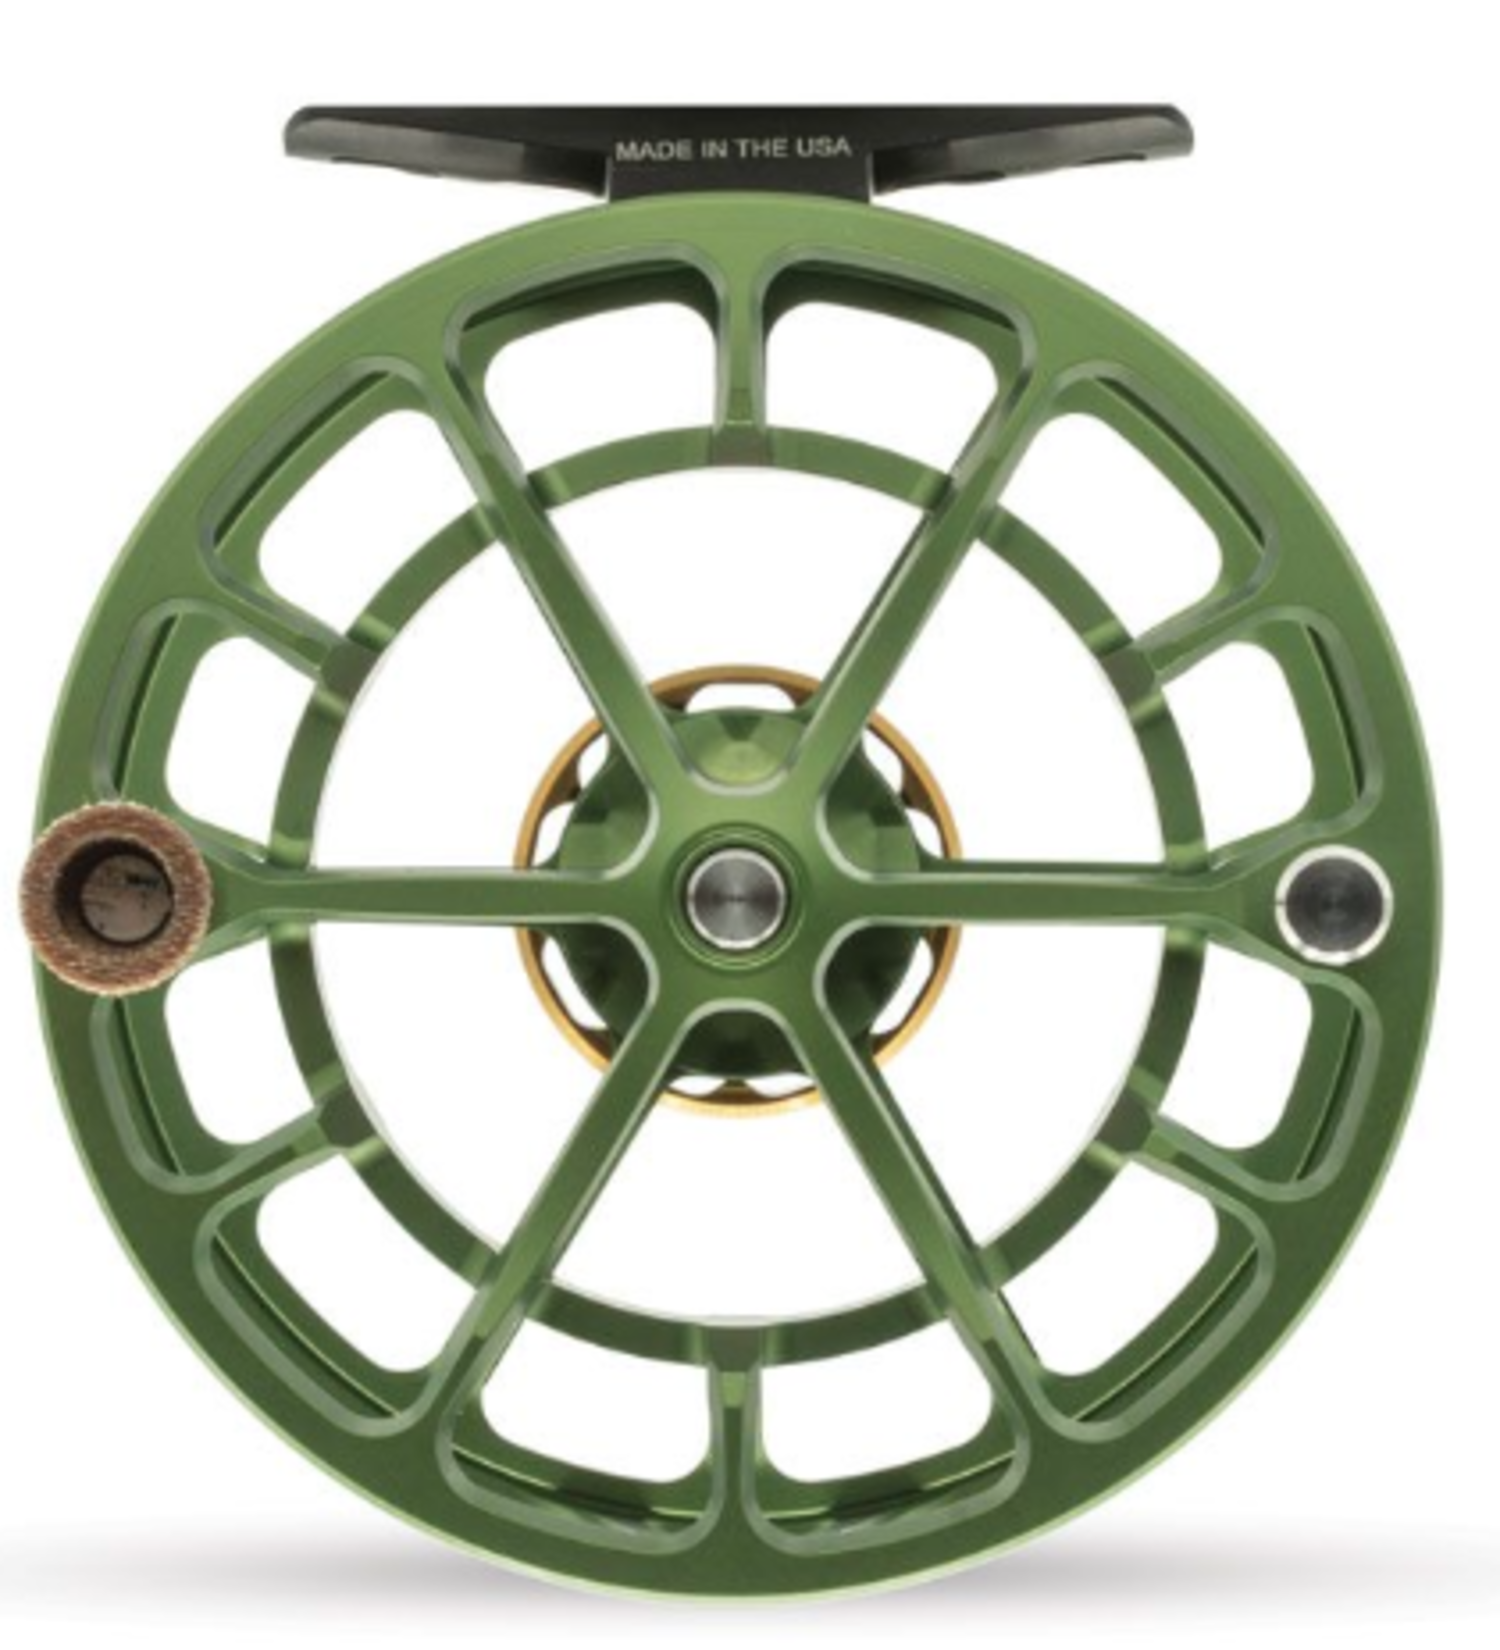 Ross Reels USA Evolution Fly Fishing Reel Product Details